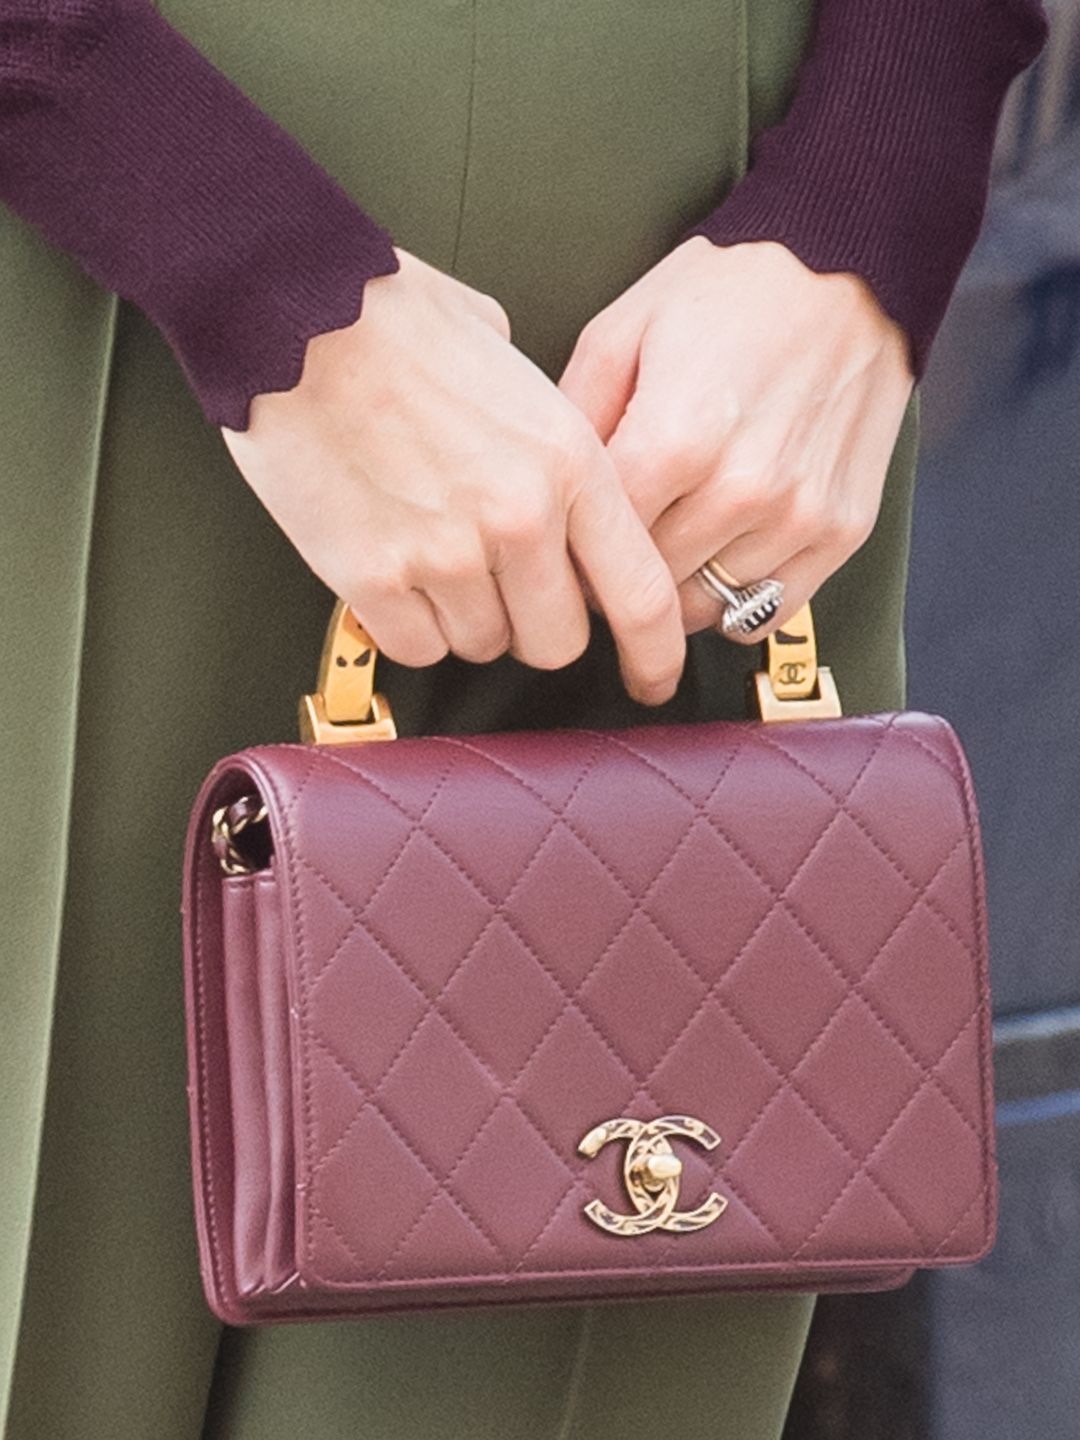 Kate Middleton Wore Her New Favorite Pant Trend With the Prettiest Chanel  Bag